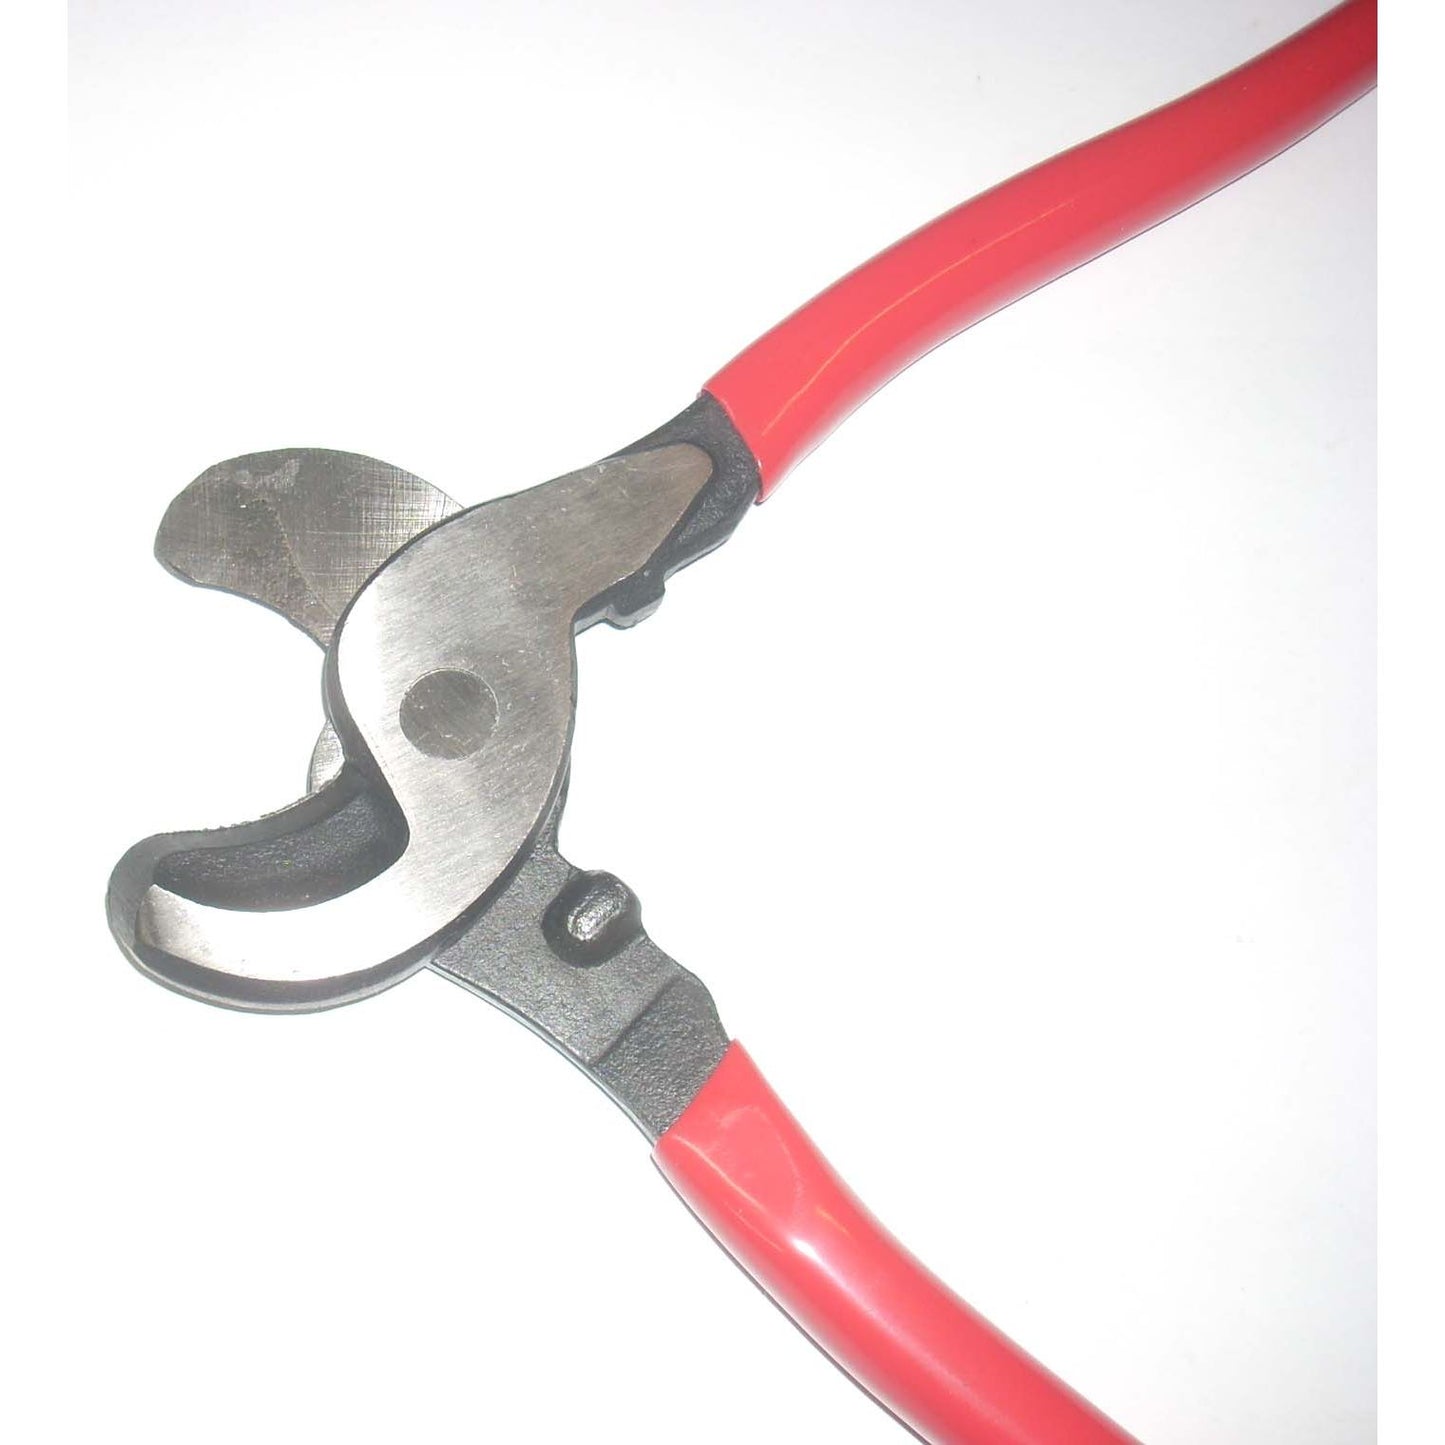 Powerweld PW52 Cable Cutters for Aluminum or Copper